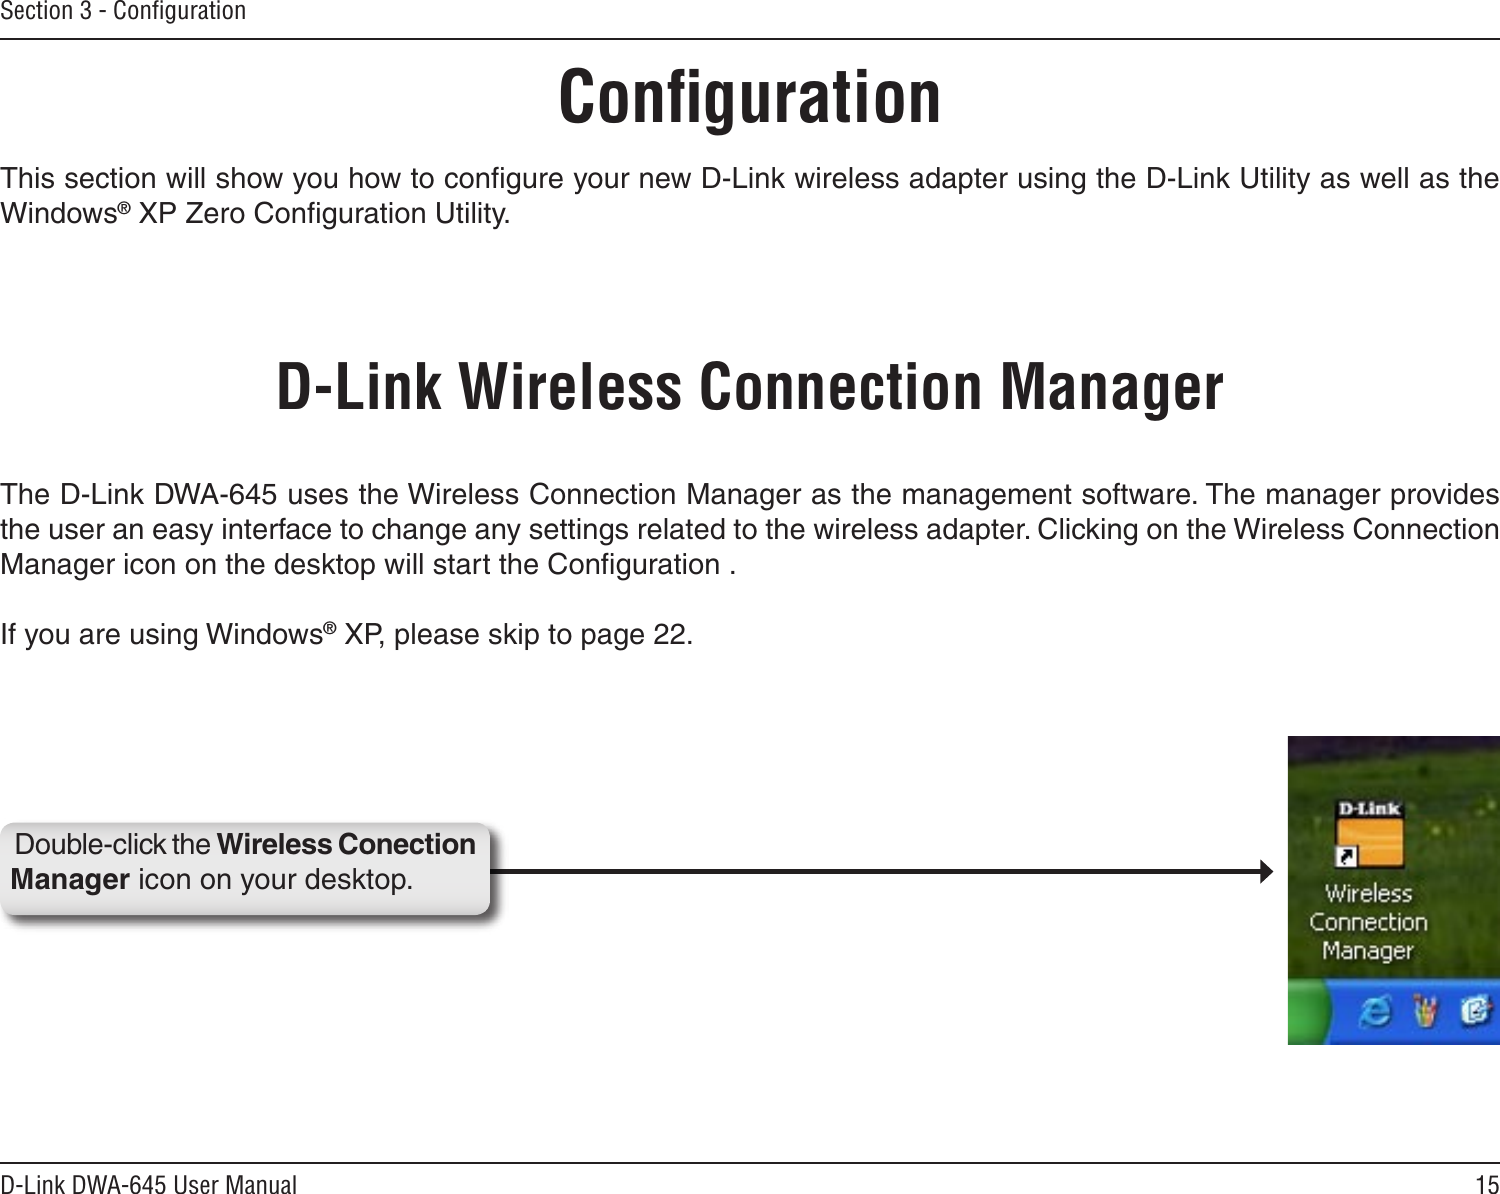 15D-Link DWA-645 User ManualSection 3 - ConﬁgurationConﬁgurationThis section will show you how to conﬁgure your new D-Link wireless adapter using the D-Link Utility as well as the Windows® XP Zero Conﬁguration Utility.D-Link Wireless Connection ManagerThe D-Link DWA-645 uses the Wireless Connection Manager as the management software. The manager provides the user an easy interface to change any settings related to the wireless adapter. Clicking on the Wireless Connection Manager icon on the desktop will start the Conﬁguration .If you are using Windows® XP, please skip to page 22.Double-click the Wireless Conection Manager icon on your desktop.